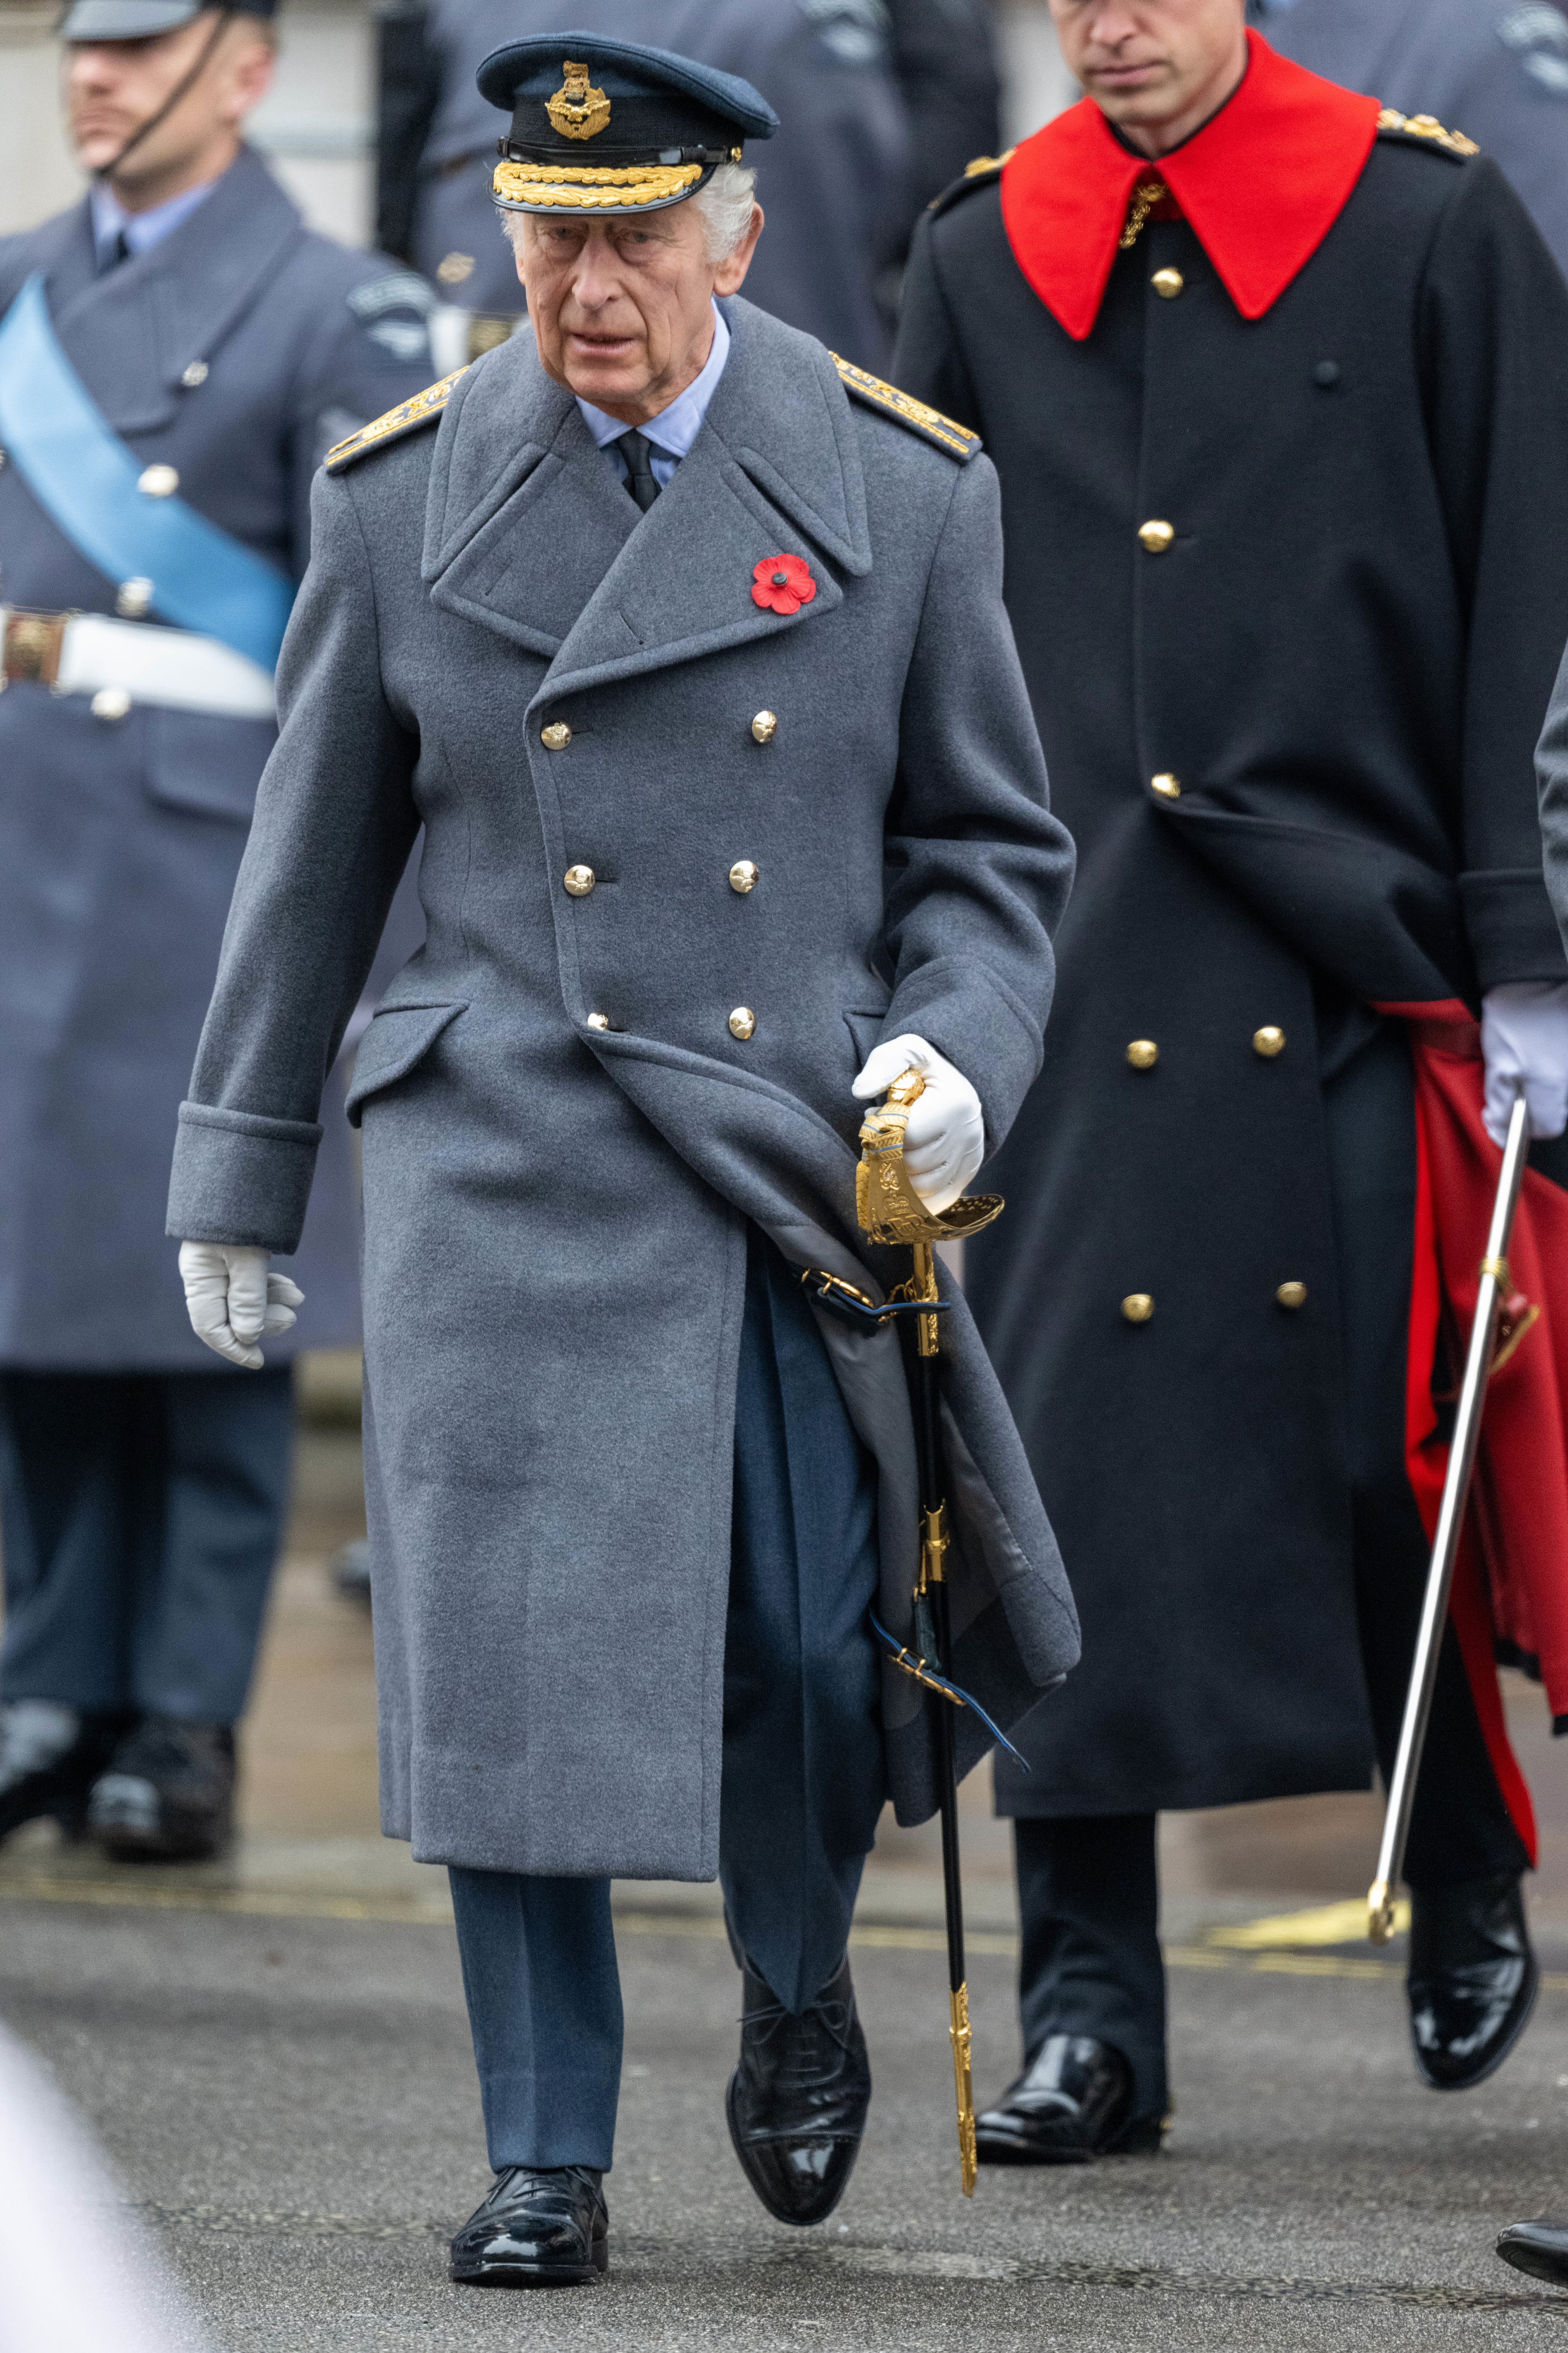 <p>King Charles III took part in <a href="https://www.wonderwall.com/entertainment/the-best-pictures-of-the-royal-family-honoring-military-heroes-on-remembrance-day-811037.gallery">the National Service of Remembrance</a> at the Cenotaph in London on Nov. 12, 2023. That's <a href="https://www.wonderwall.com/celebrity/profiles/overview/prince-william-482.article">Prince William</a> following behind him. </p><p>The annual event commemorated the contribution of the British and Commonwealth military and civilian servicemen and women involved in the two world wars and later conflicts.</p>